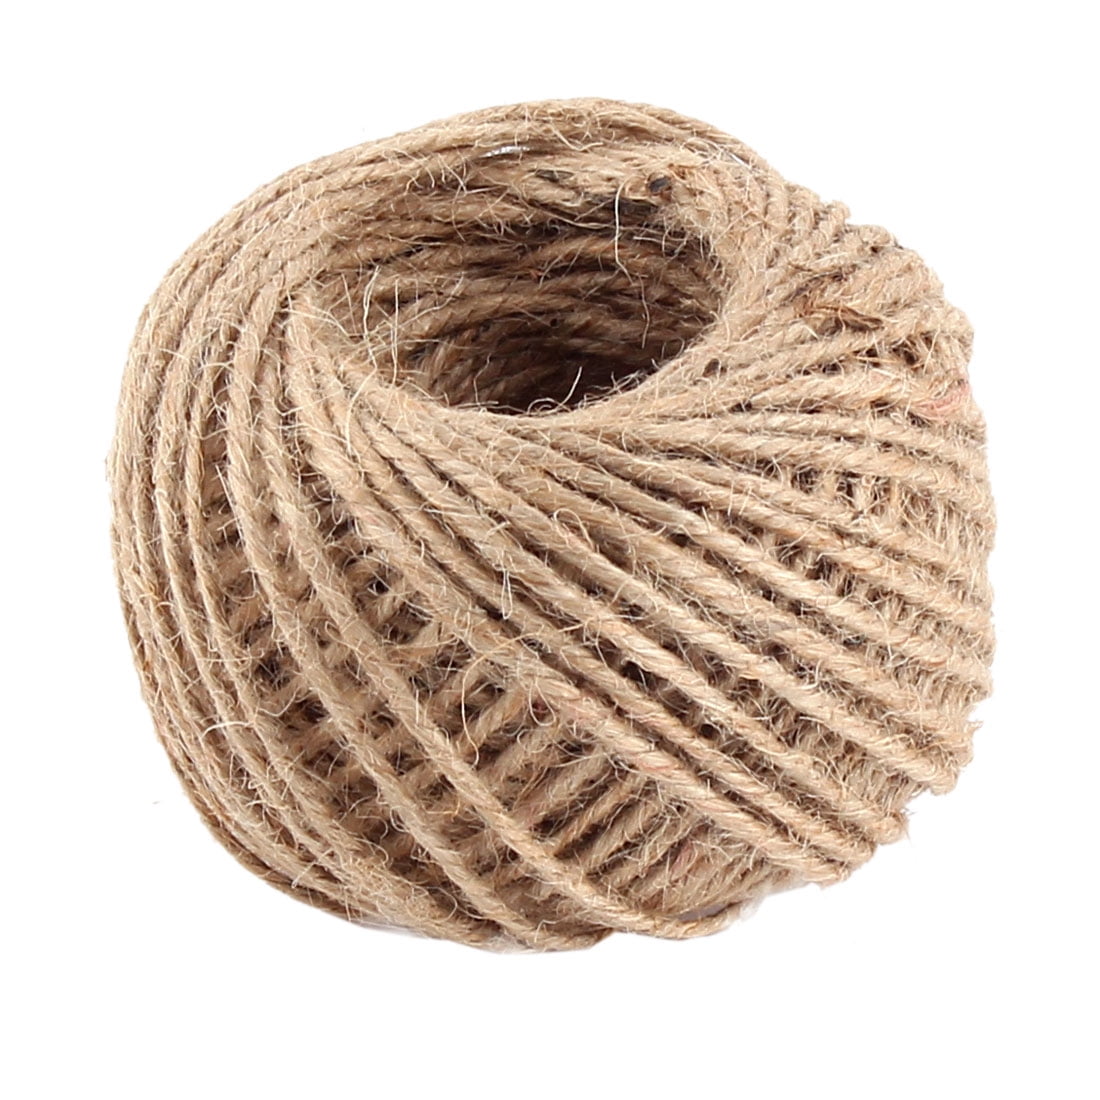  OSALADI 3pcs Colored Twine Waxed Jute Twine Brown Jute Twine  Twine Burlap Twine DIY Crafts Jute Twine Jute Twine for Crafts Cord Jute  Twine Bulk Rope to Weave White Accessories 